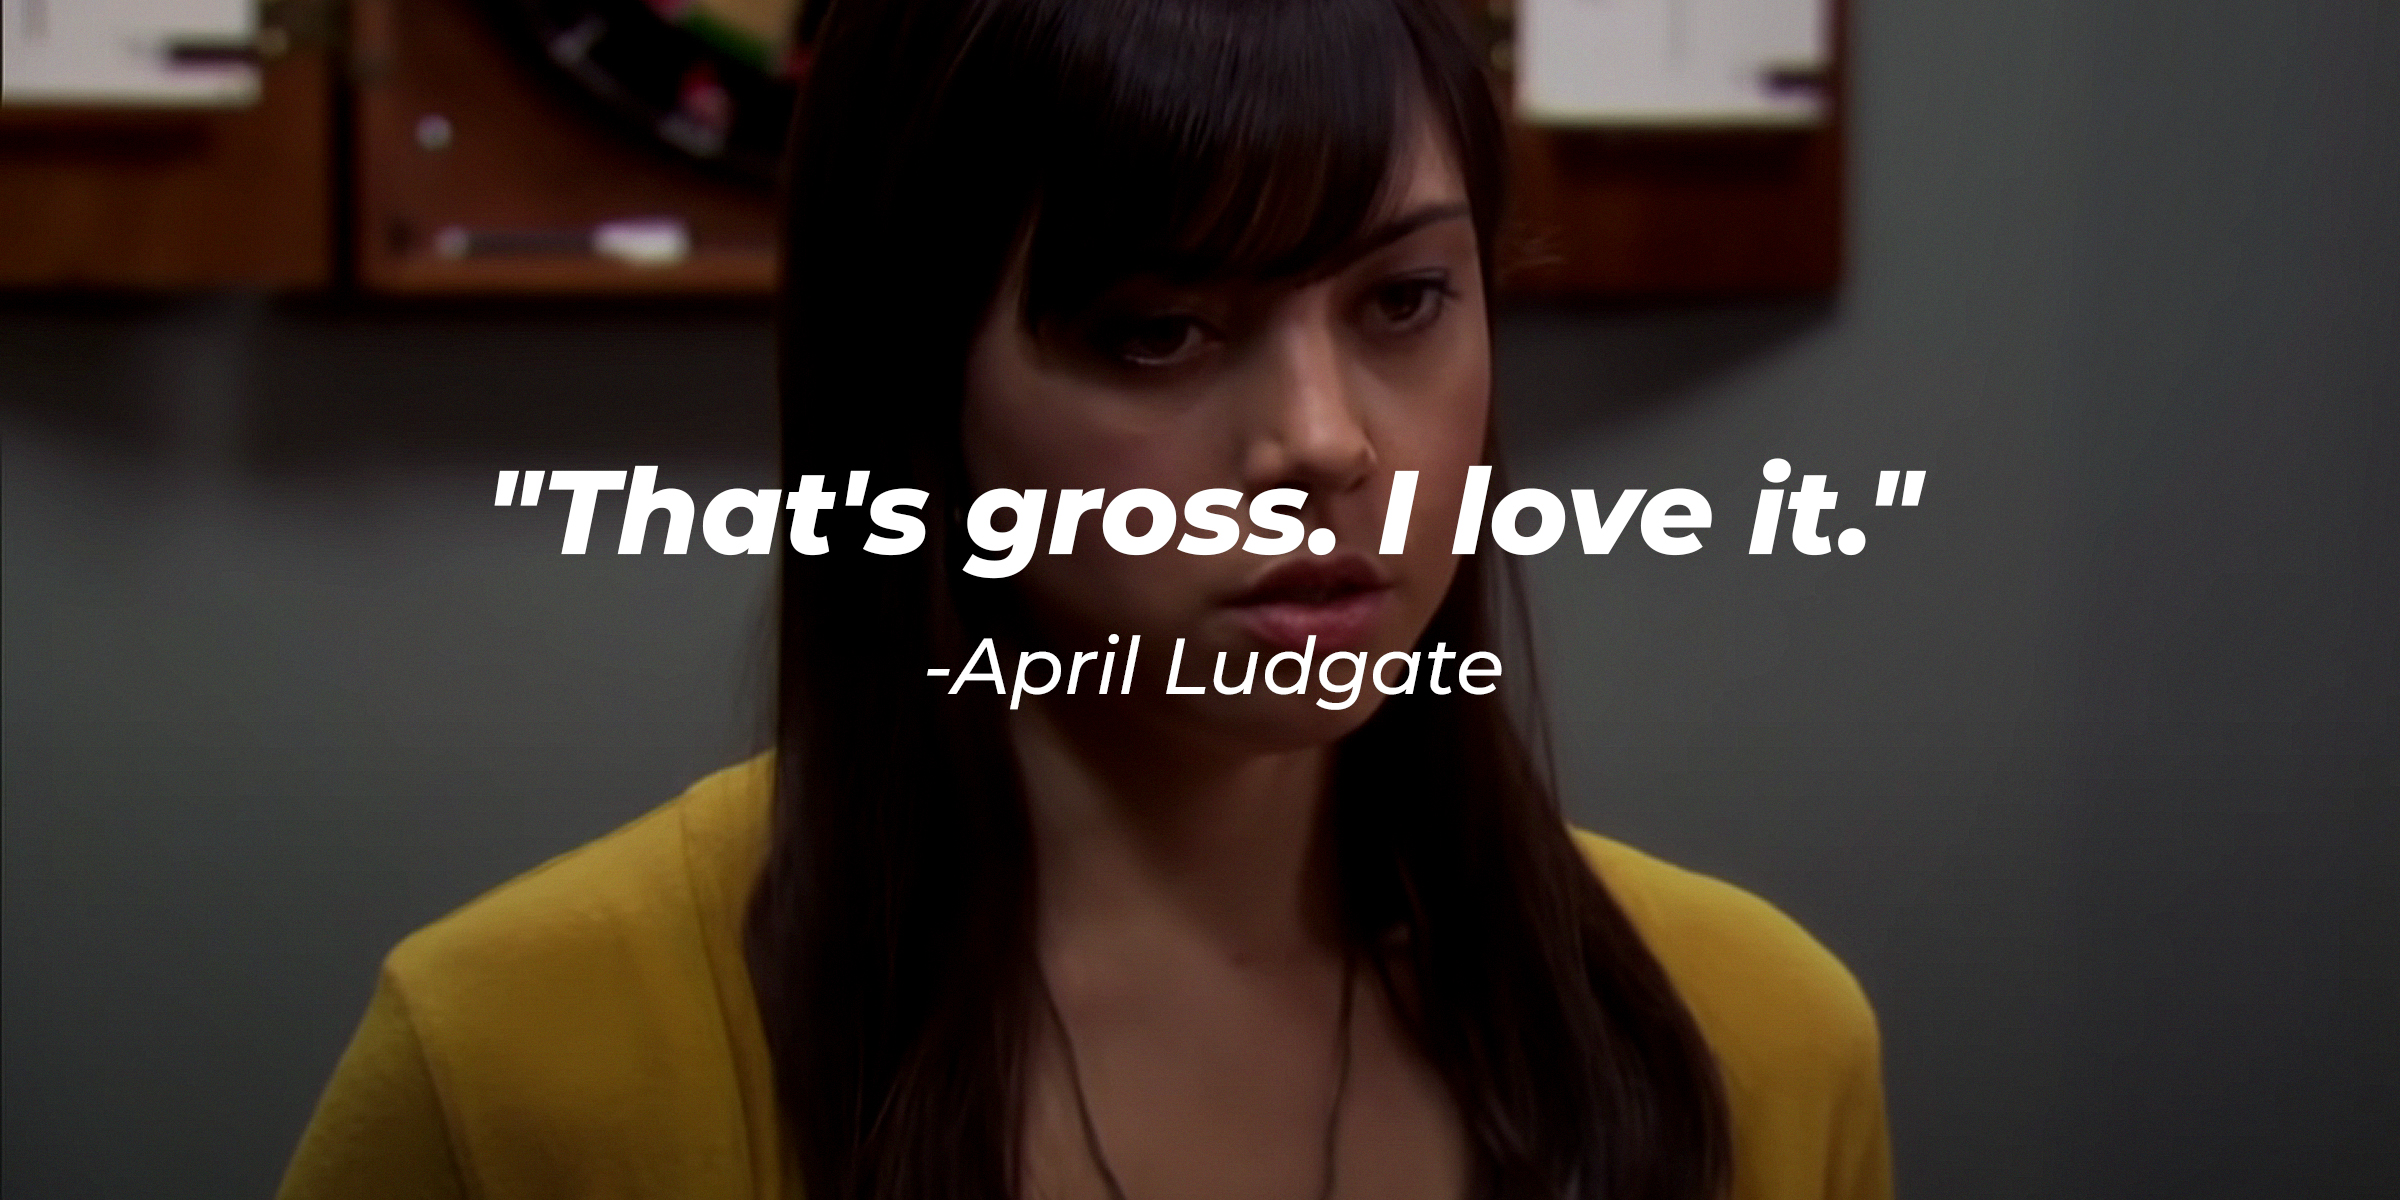 April Ludgate's quote, "That's gross. I love it." | Source: Youtube/ComedyBites